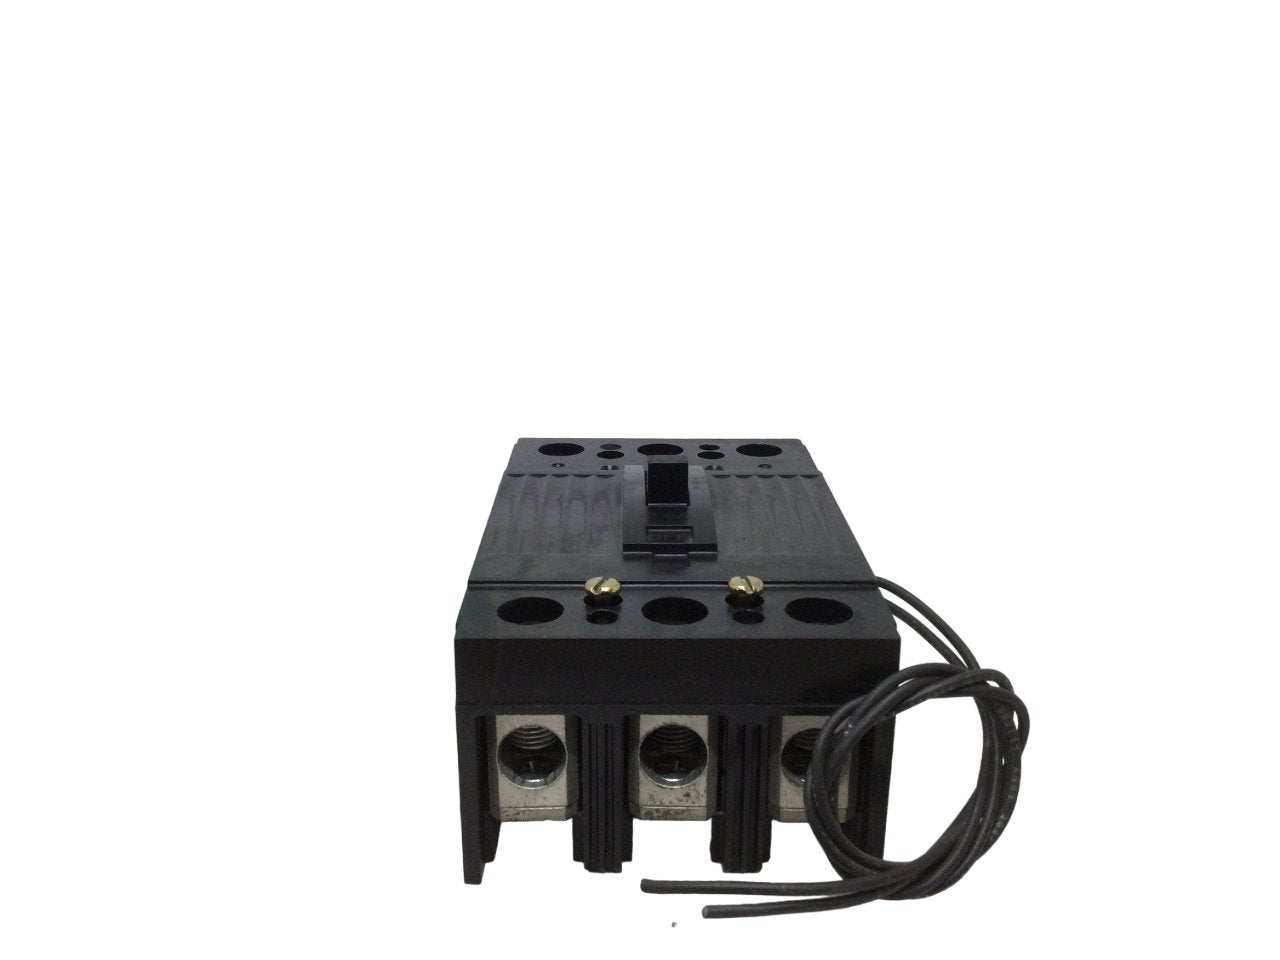 THQD32225ST1 - General Electrics - Molded Case Circuit Breakers